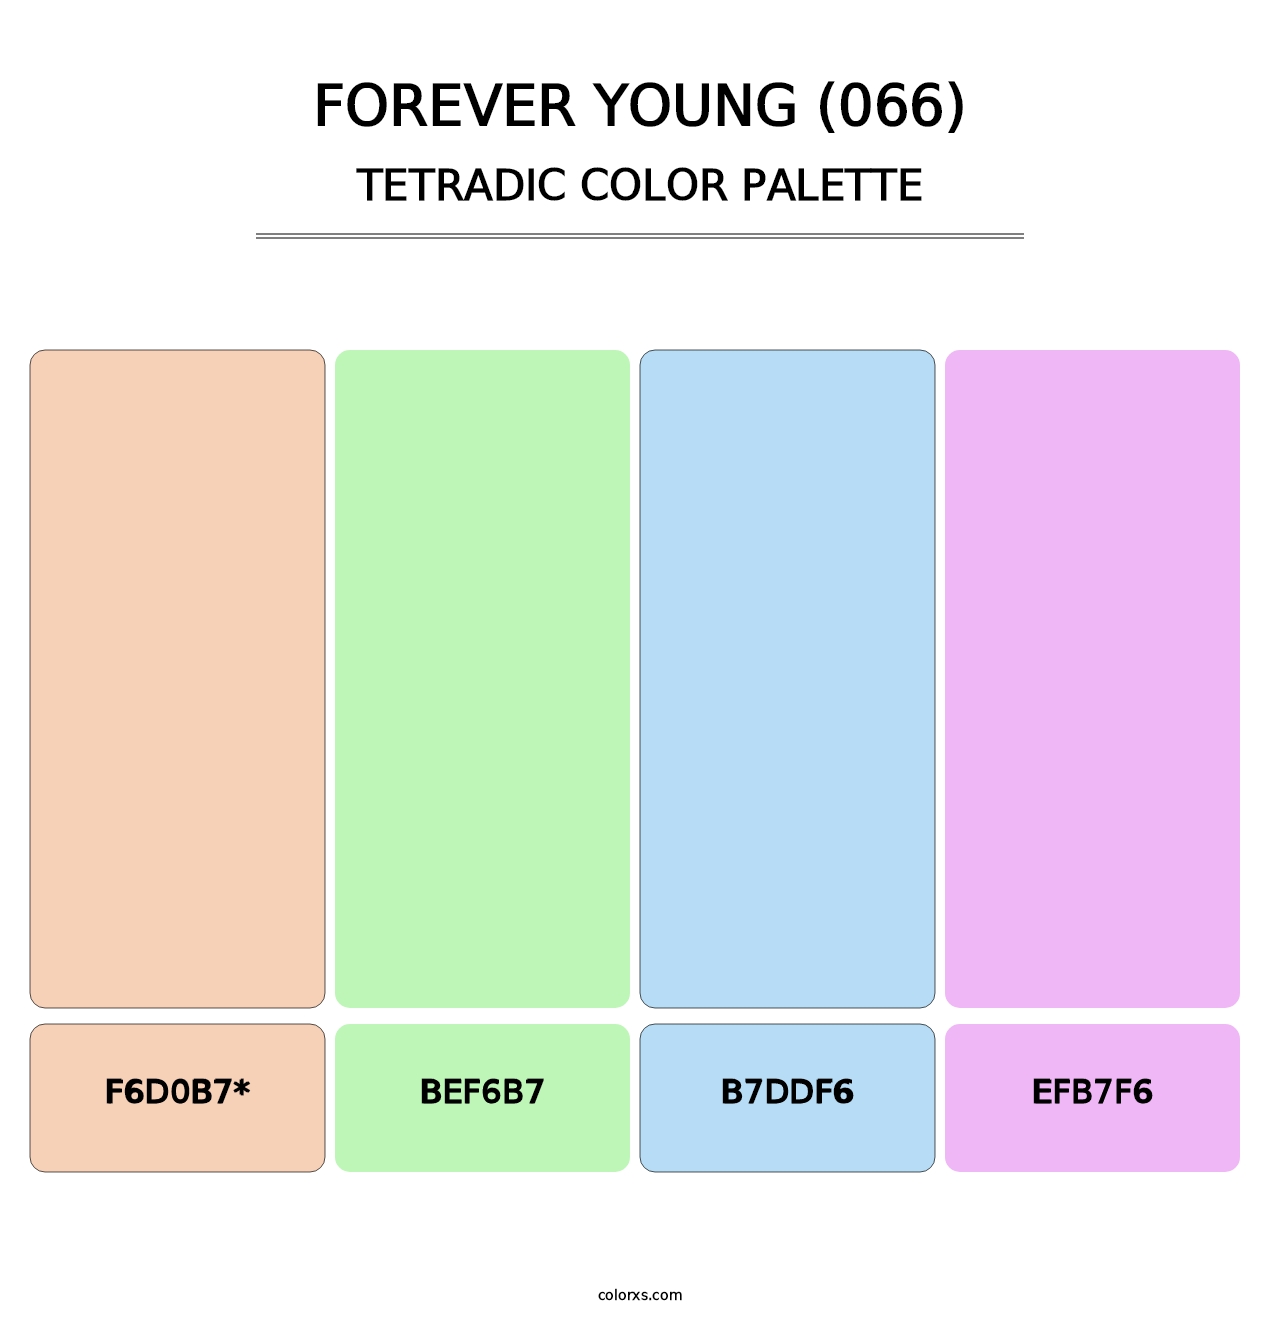 Forever Young (066) - Tetradic Color Palette